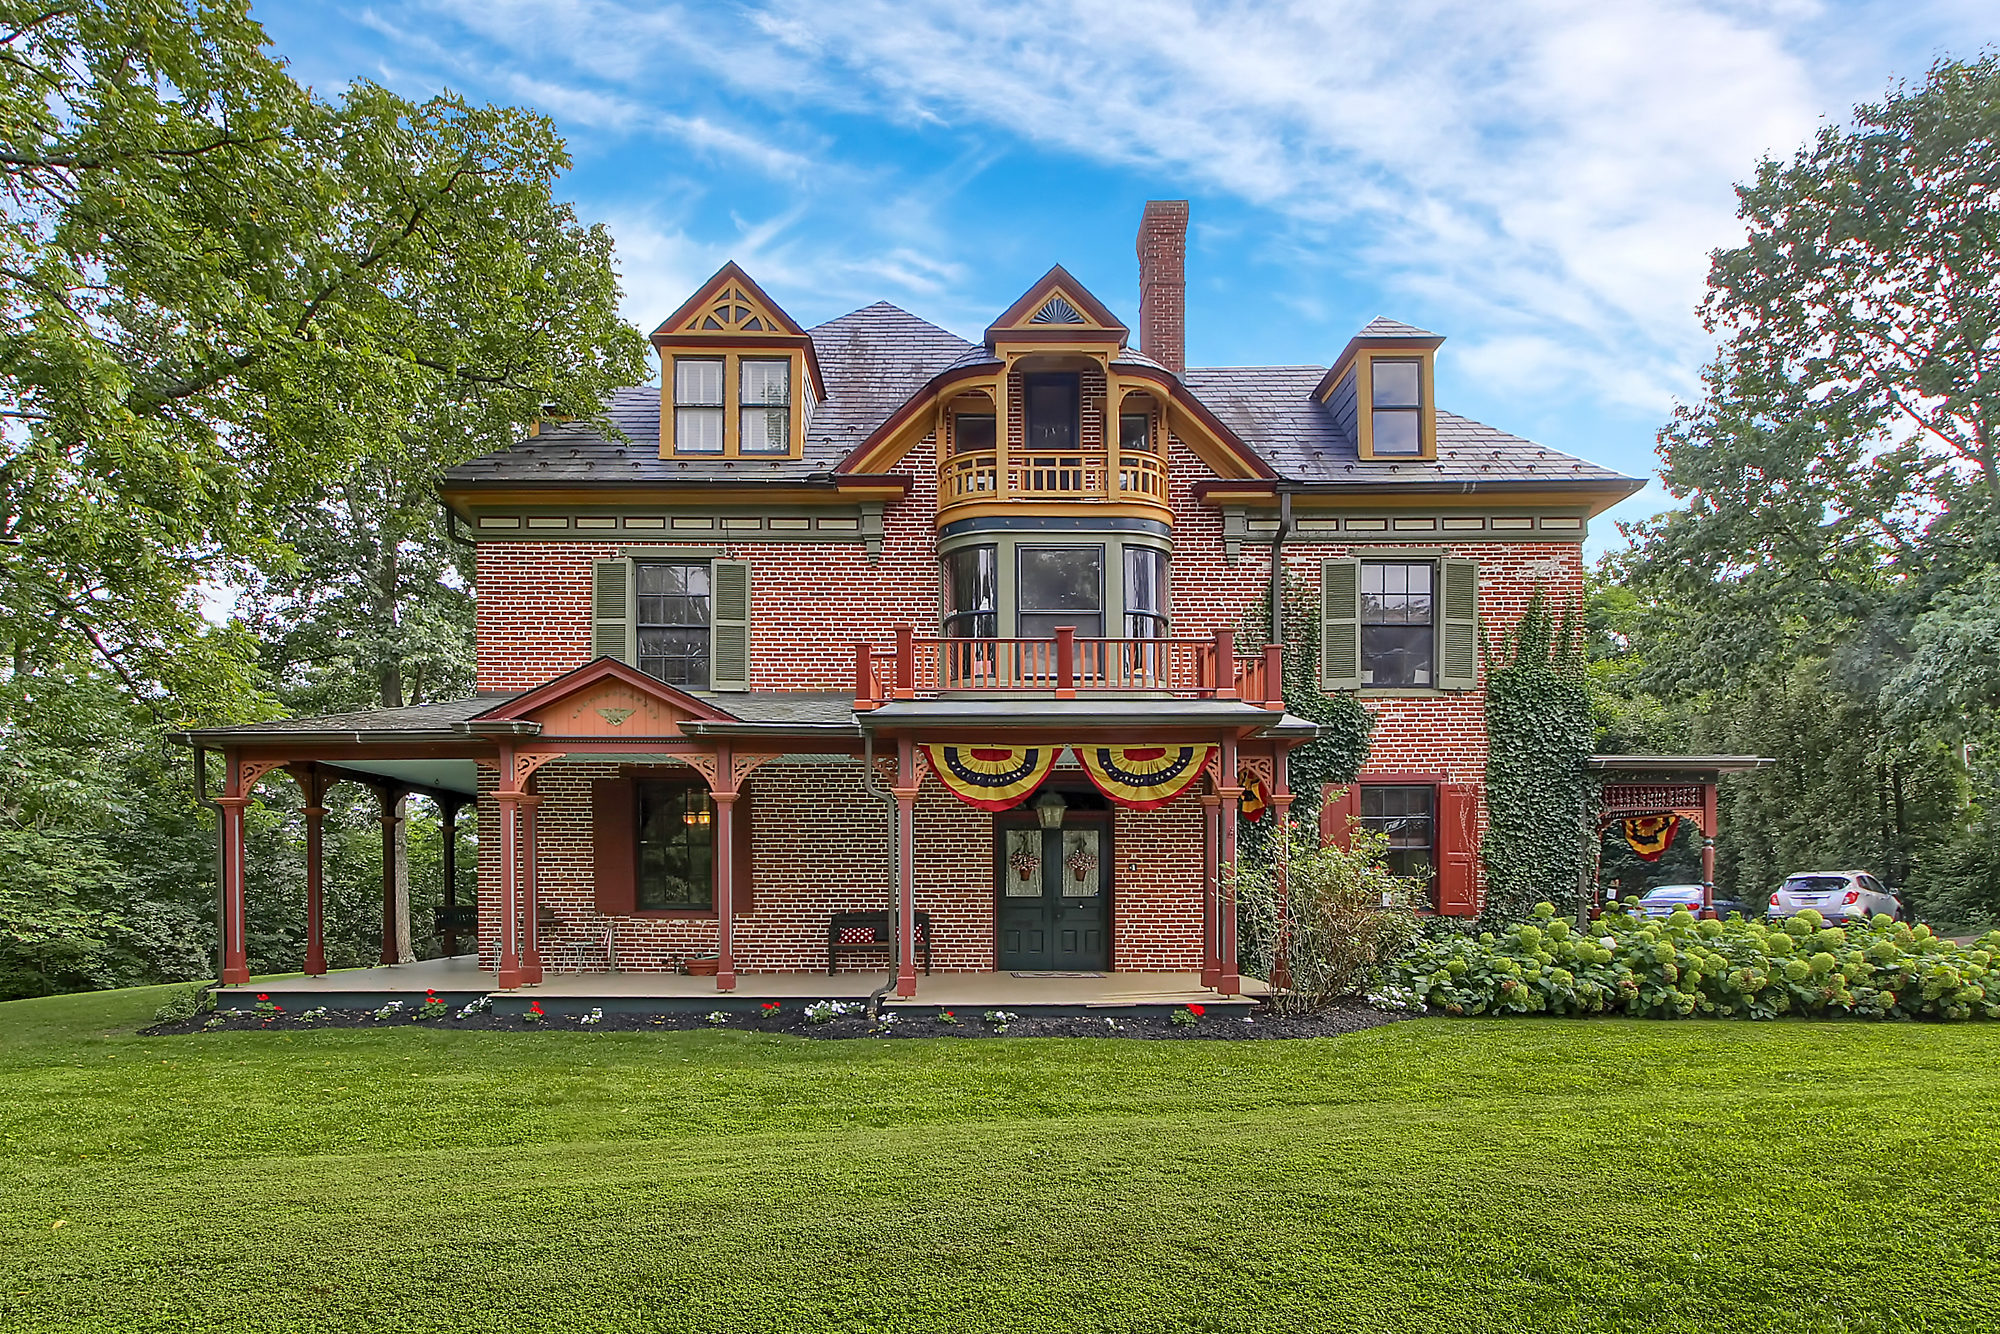 Historical Pre-Civil War Residence | CIRCA Old Houses | Old Houses ...